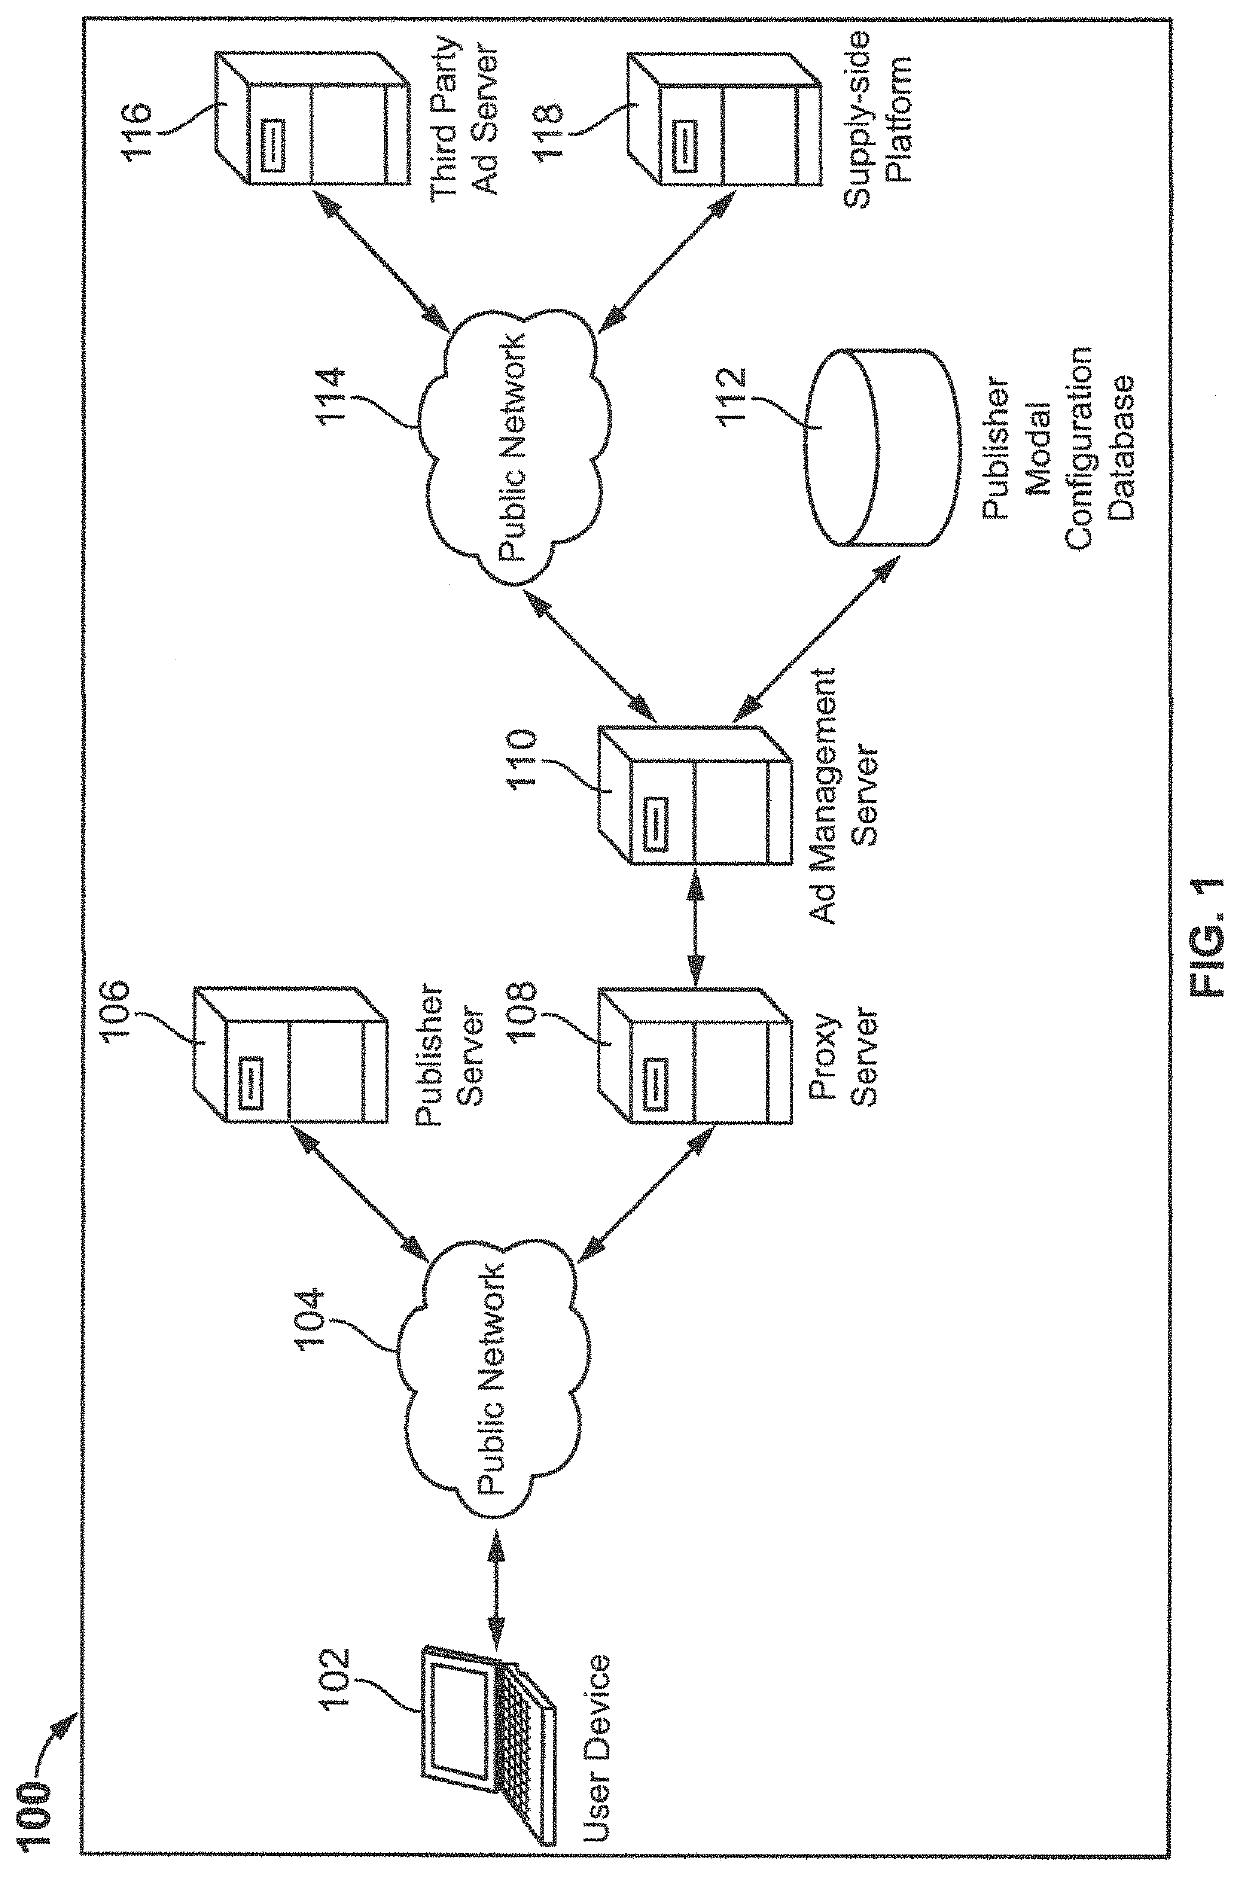 System and method for circumventing advertisement blockers